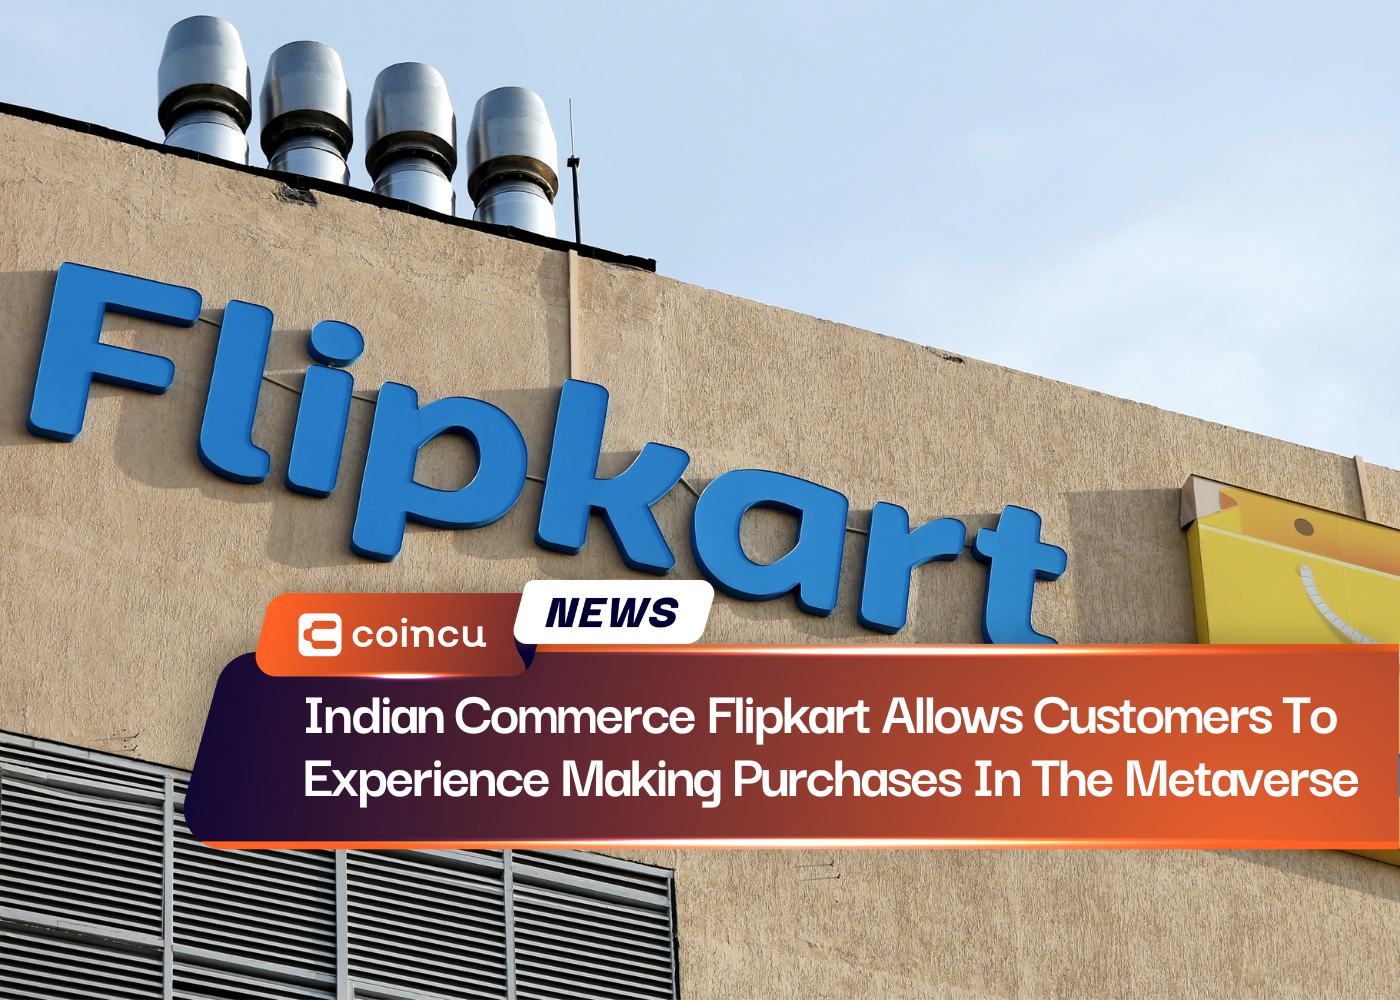 Indian Commerce Flipkart Allows Customers To Experience Making Purchases In The Metaverse